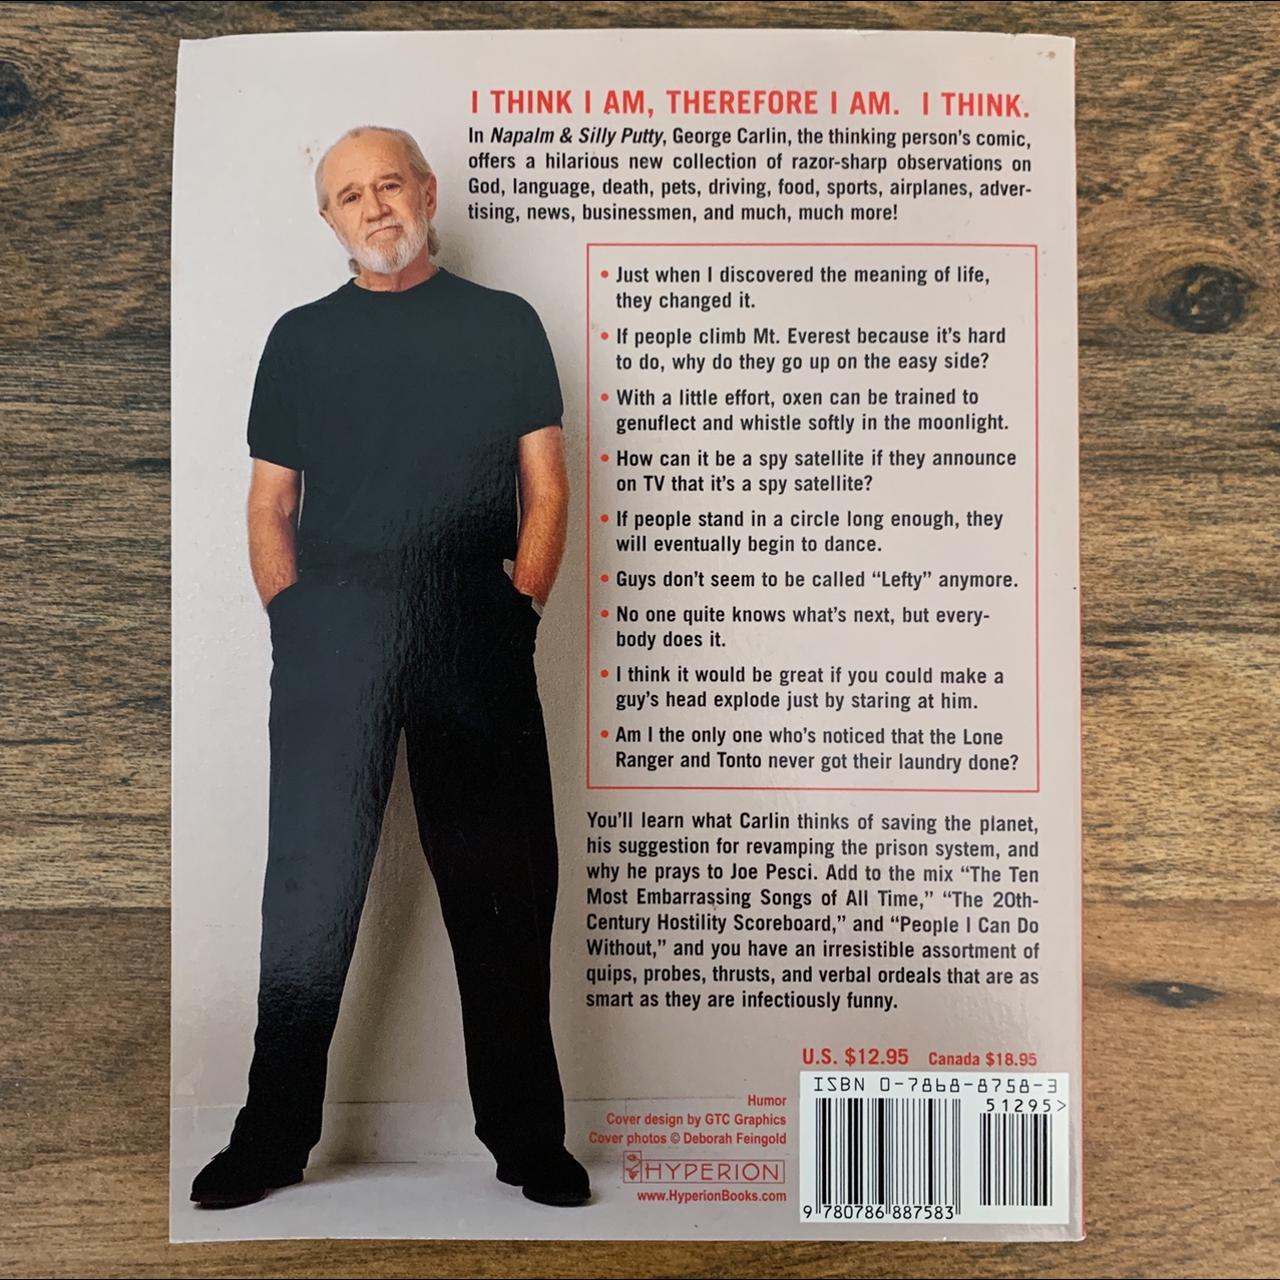 Product Image 2 - *FREE SHIPPING*

George Carlin - Napalm